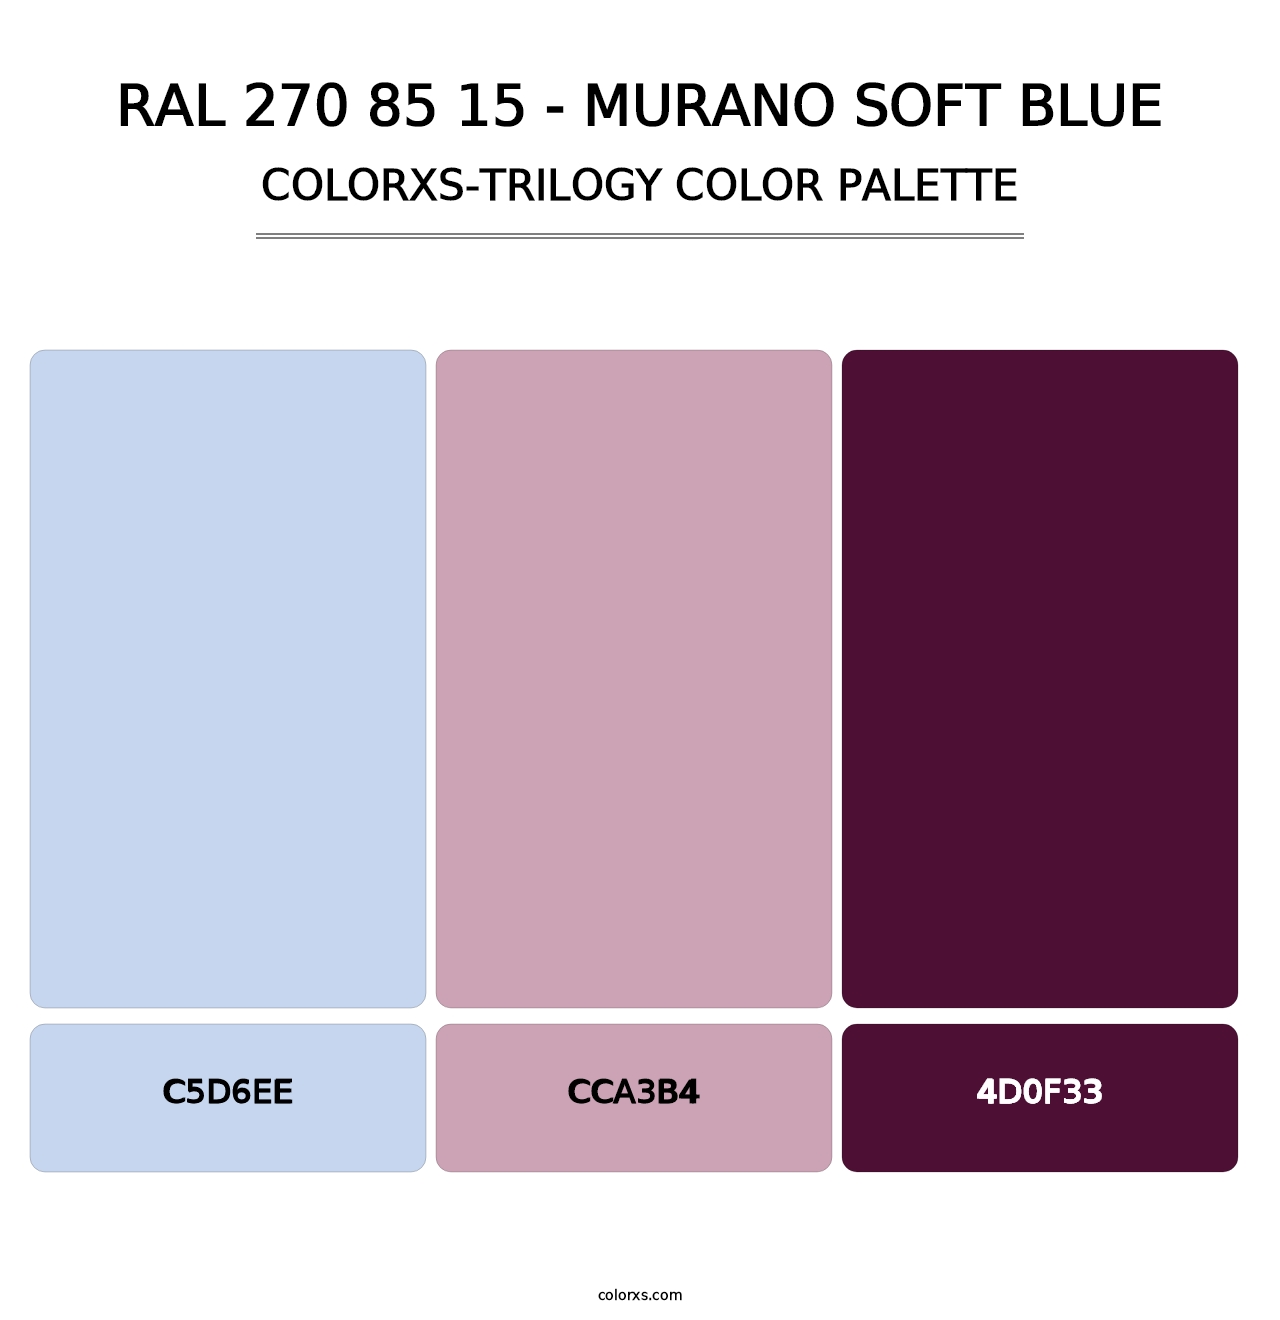 RAL 270 85 15 - Murano Soft Blue - Colorxs Trilogy Palette